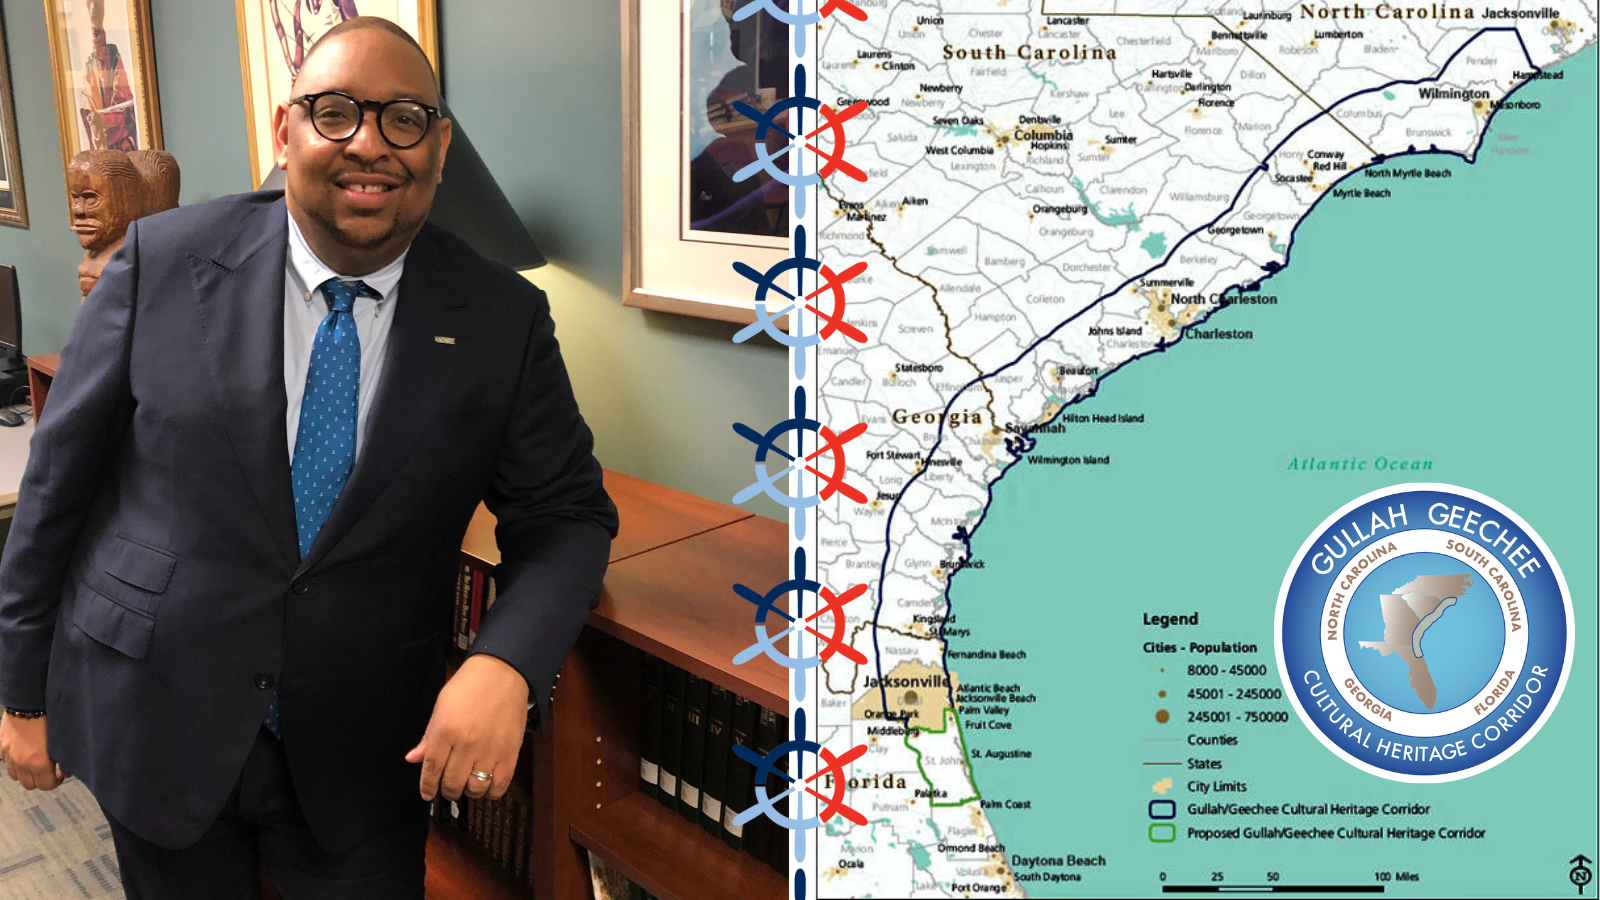 left side image of black man in round glasses and dark suit. right image of map of southeast US with logo in the water off Georgia